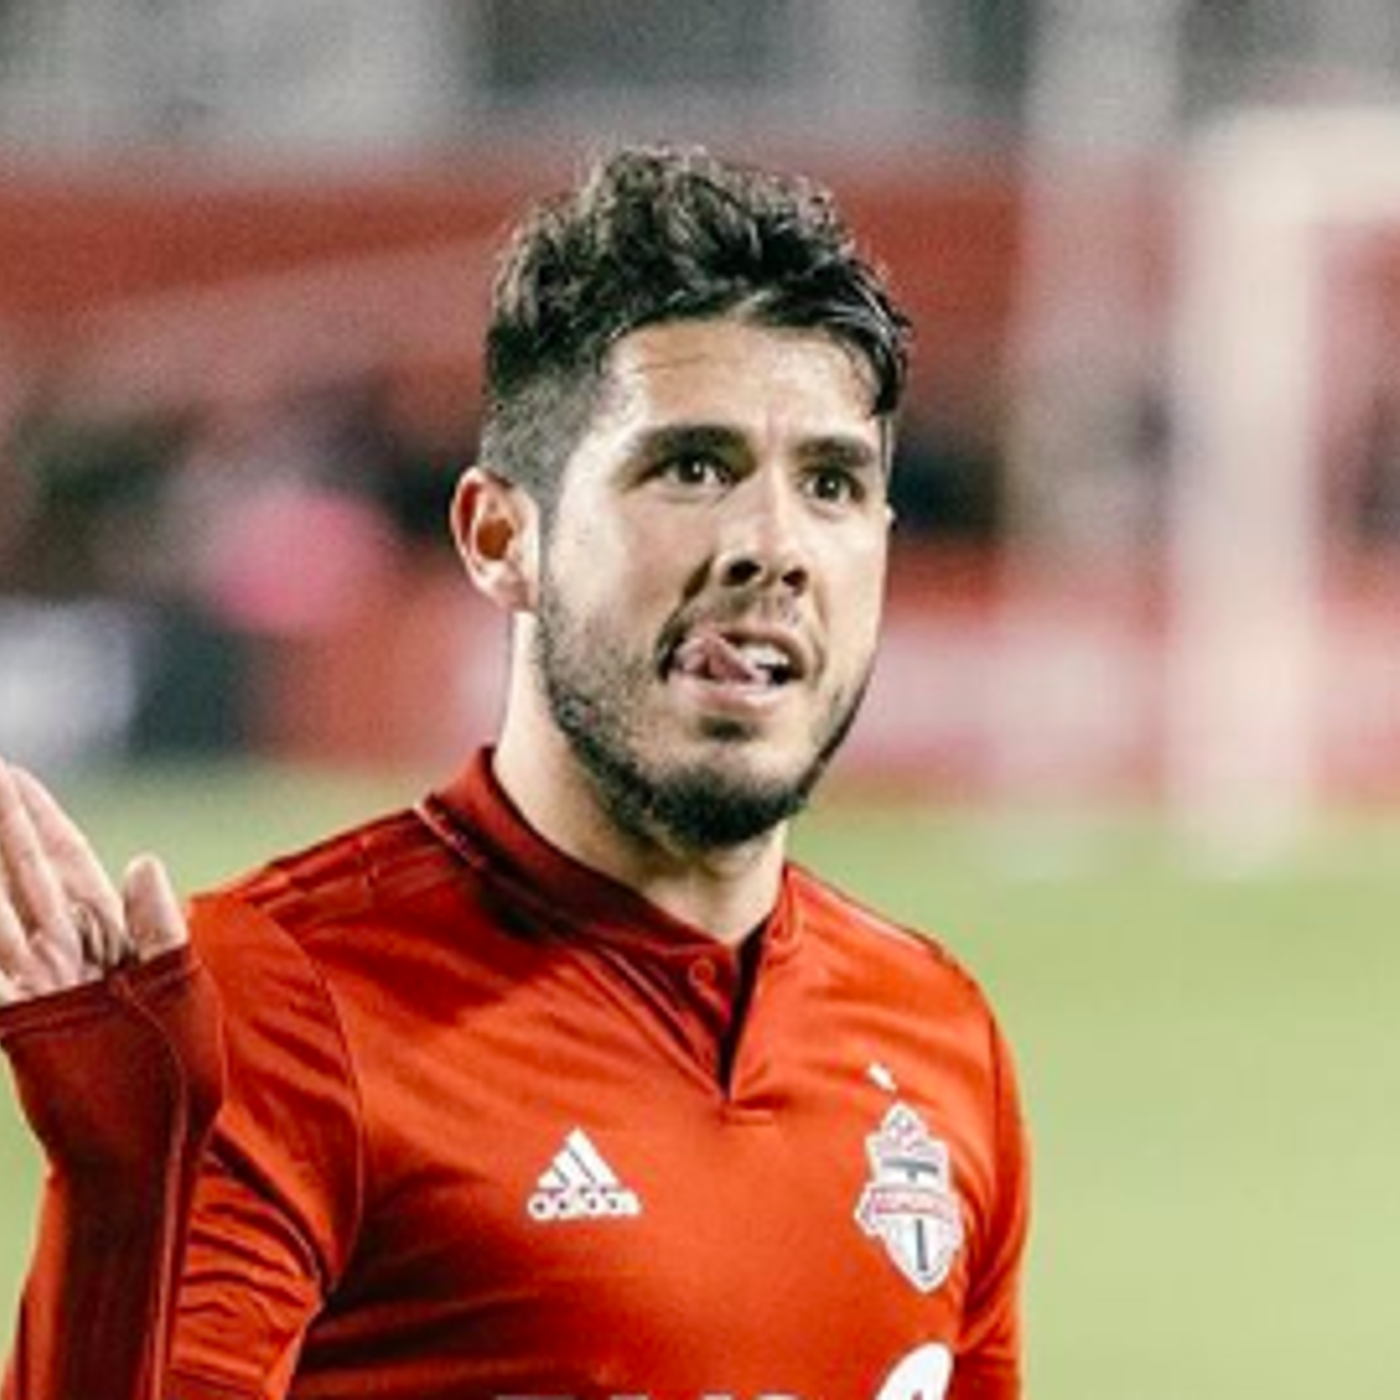 S1 Ep74: Footy Talks Podcast - Episode 51: The Pozuelo Show